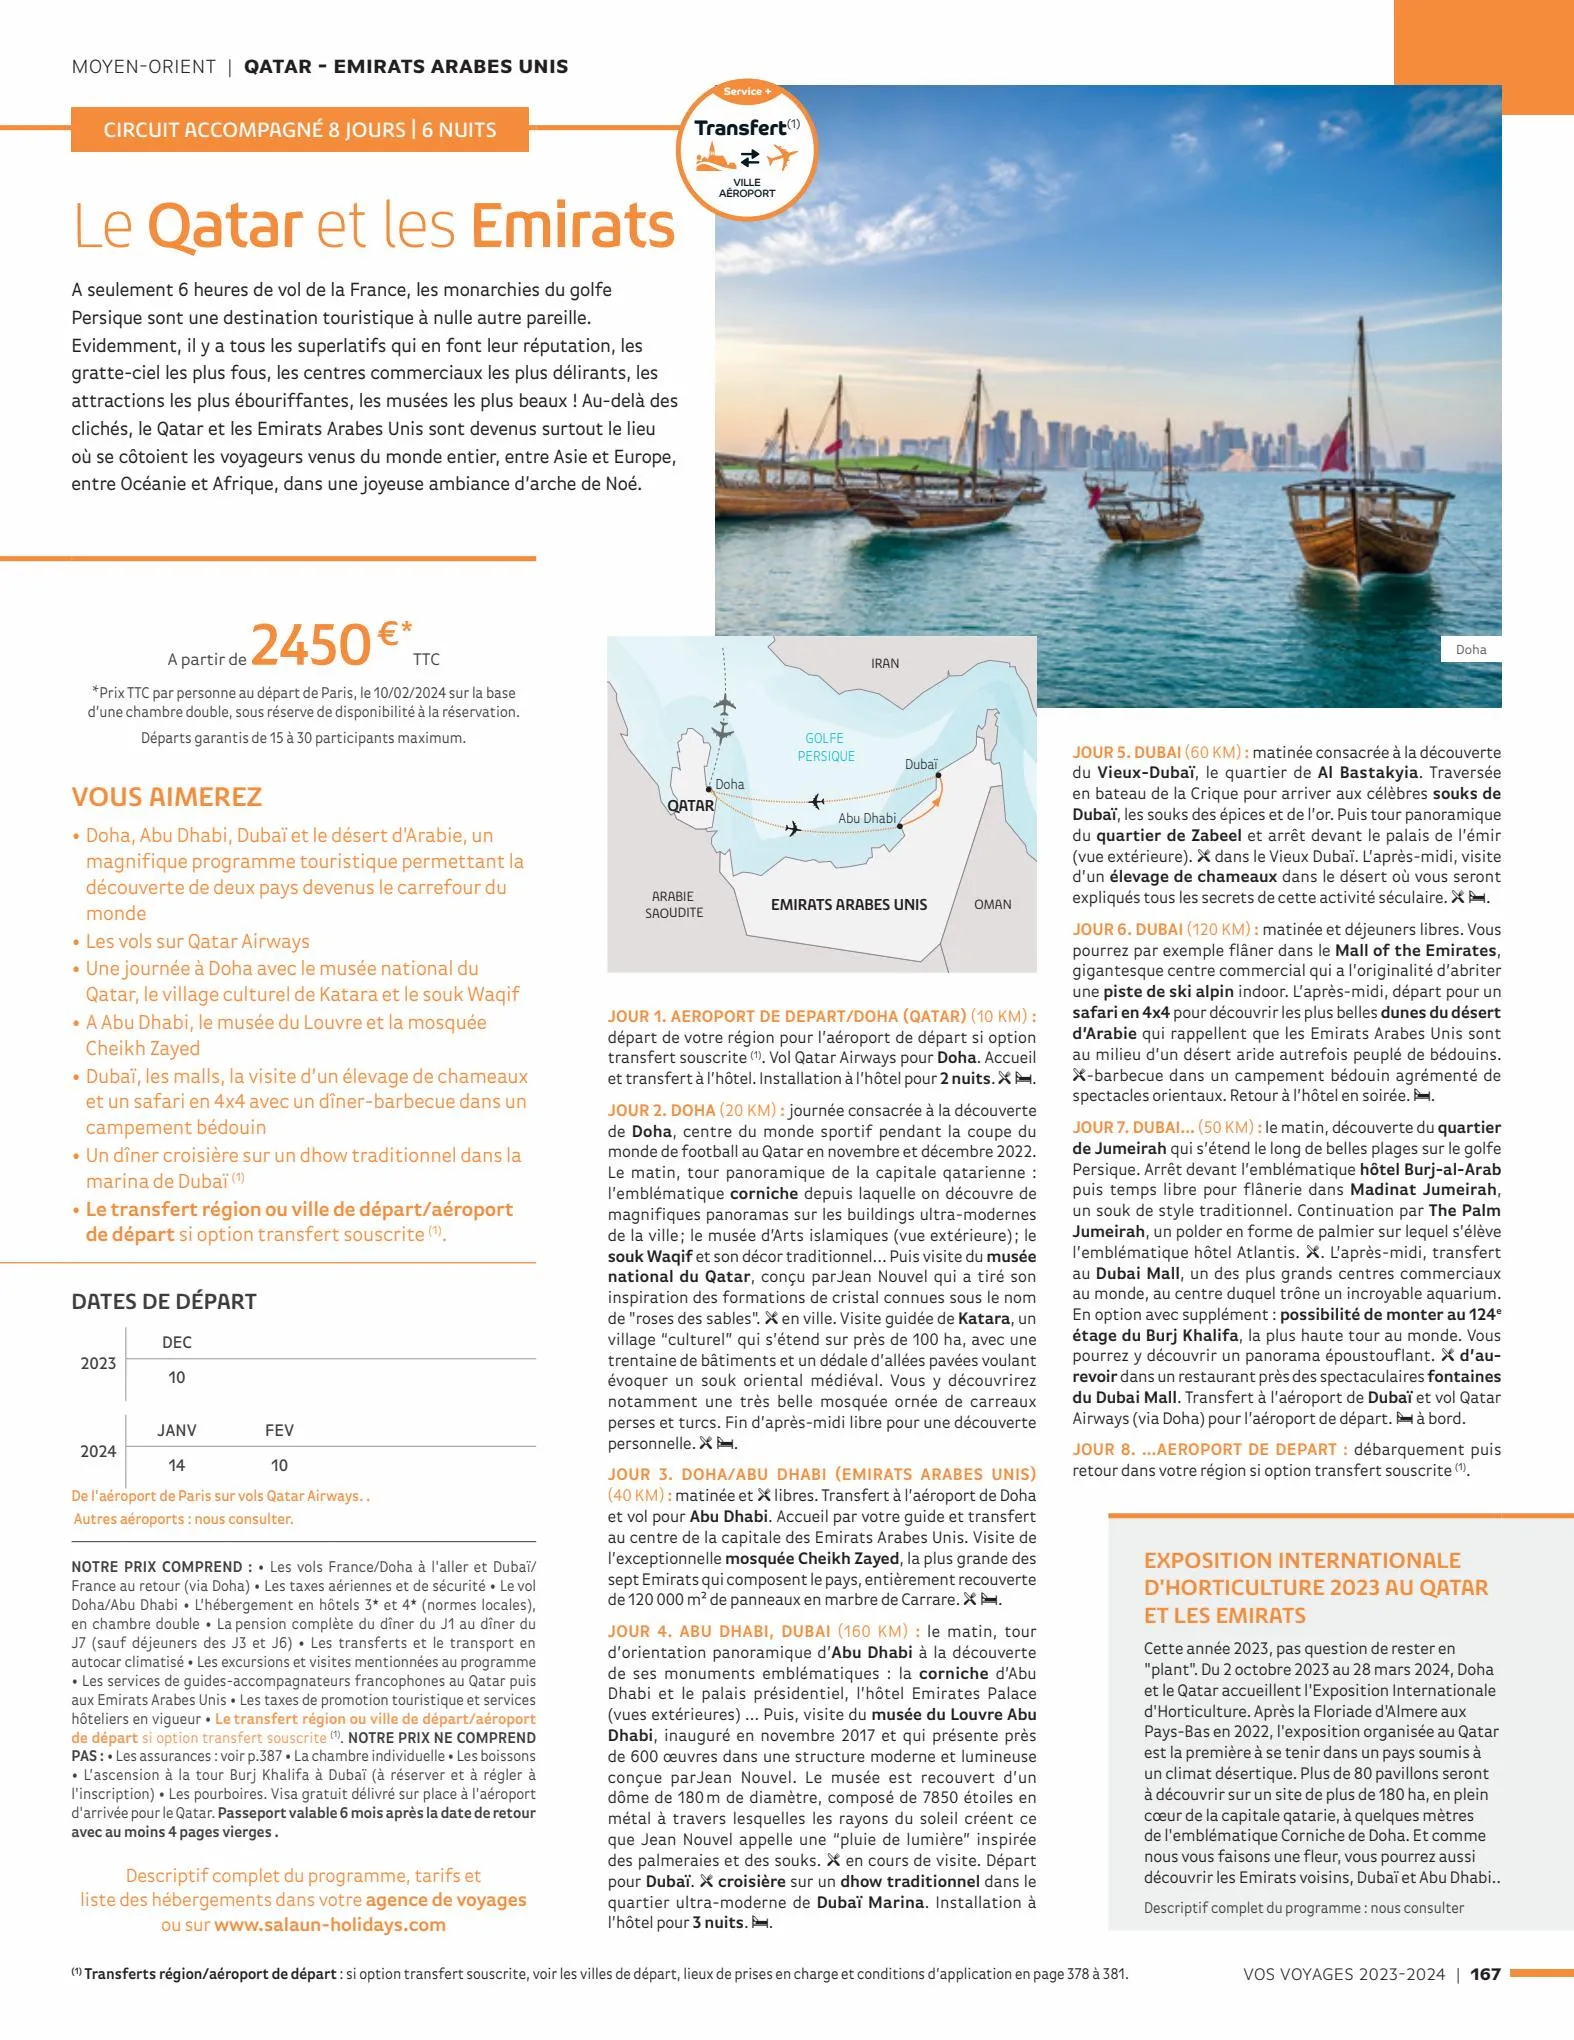 Catalogue Vos voyages 2023-2024, page 00167